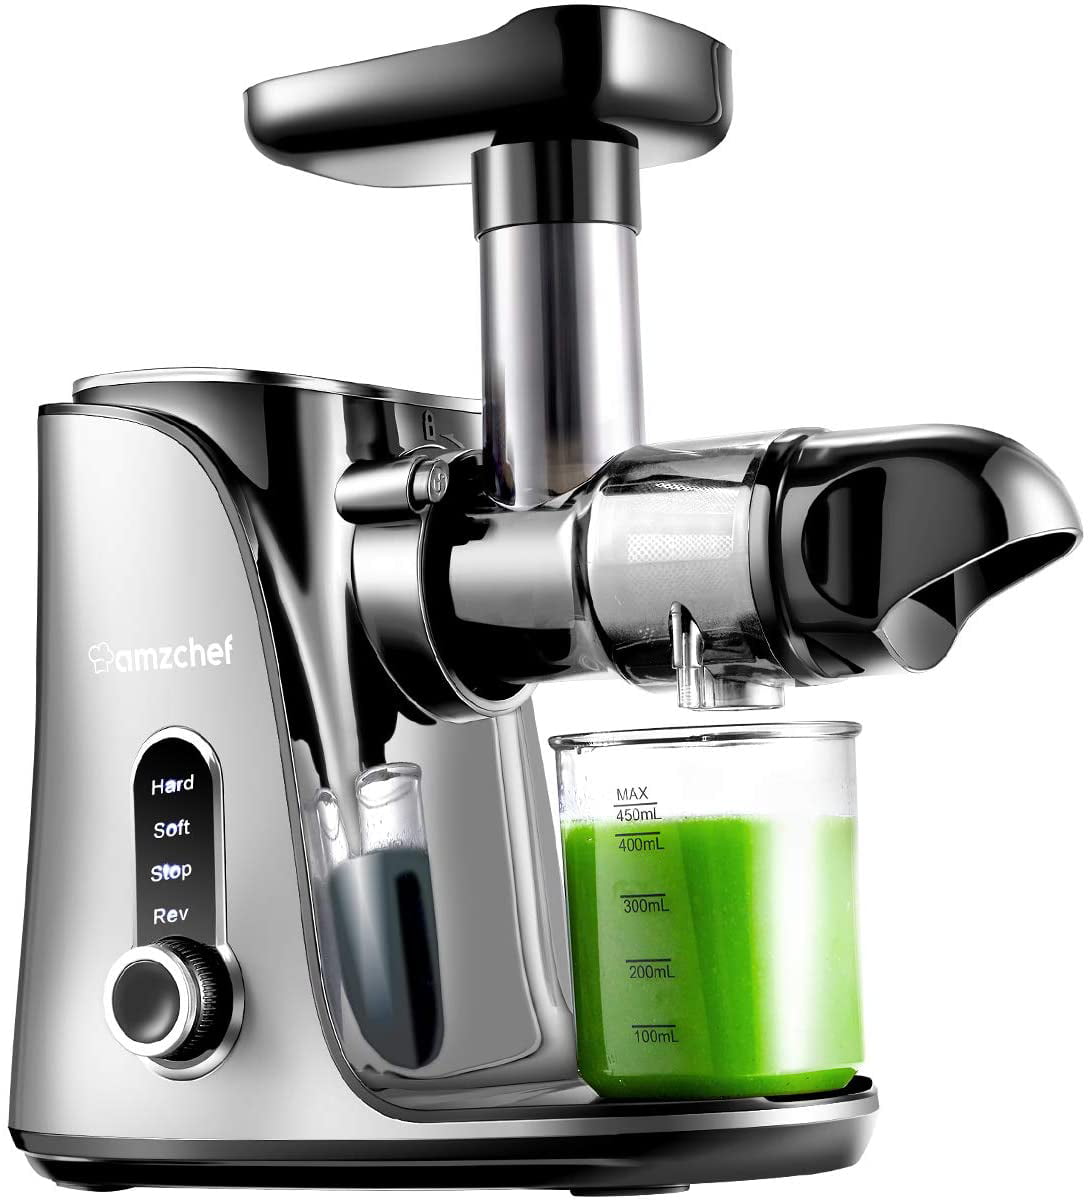 Juicer Machines,AMZCHEF Slow Masticating Juicer Extractor, Cold Press  Juicer with Two Speed Modes, 2 Travel bottles(500ML),LED display, Easy to  Clean 